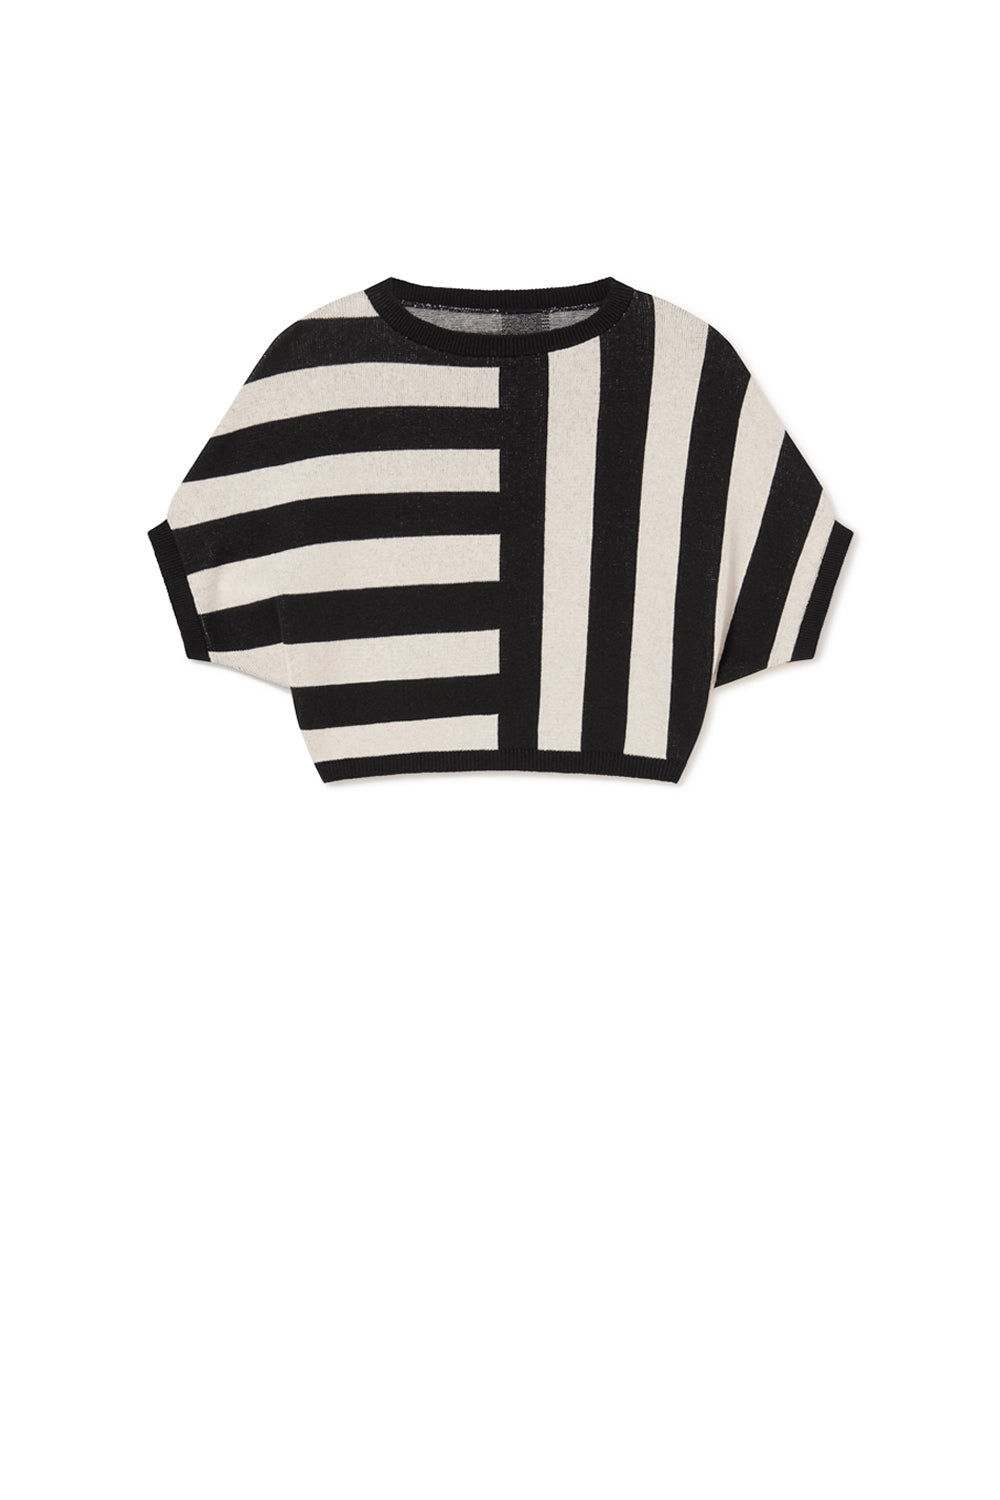 Iconic Lines Knit Jumper